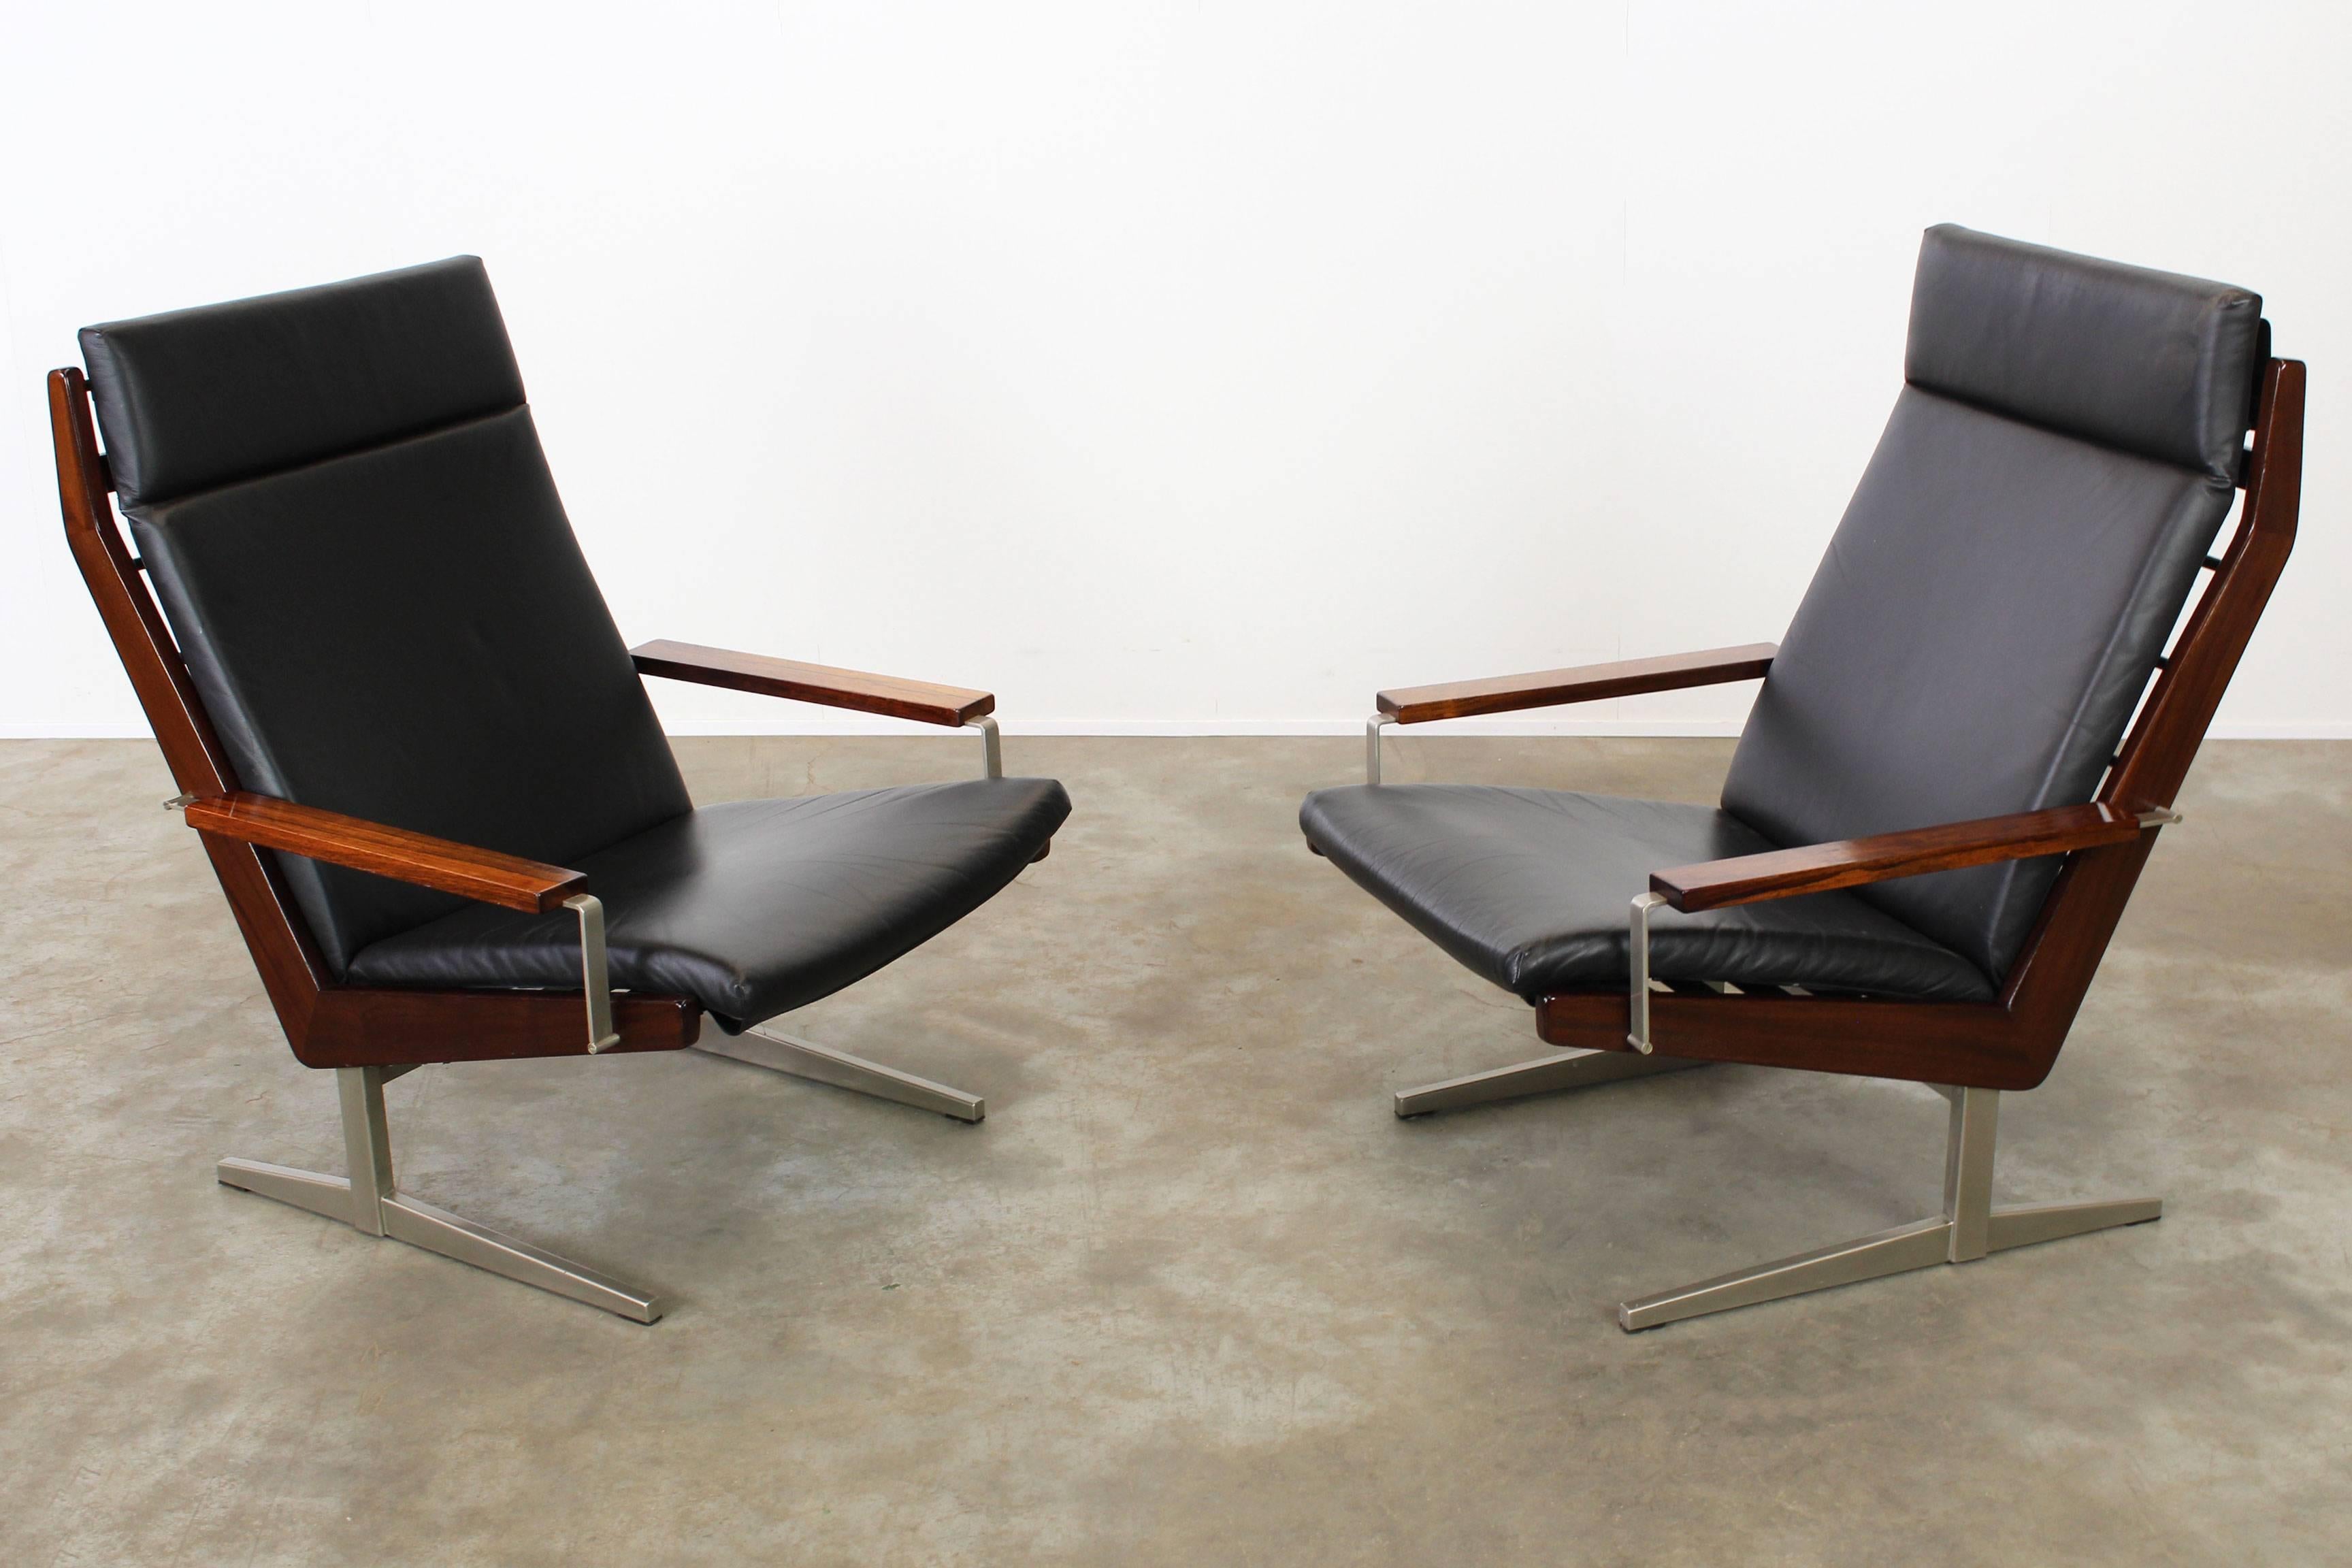 Rare Pair of Lotus Lounge Chairs by Rob Parry for Gelderland 1960 Dutch Design 1